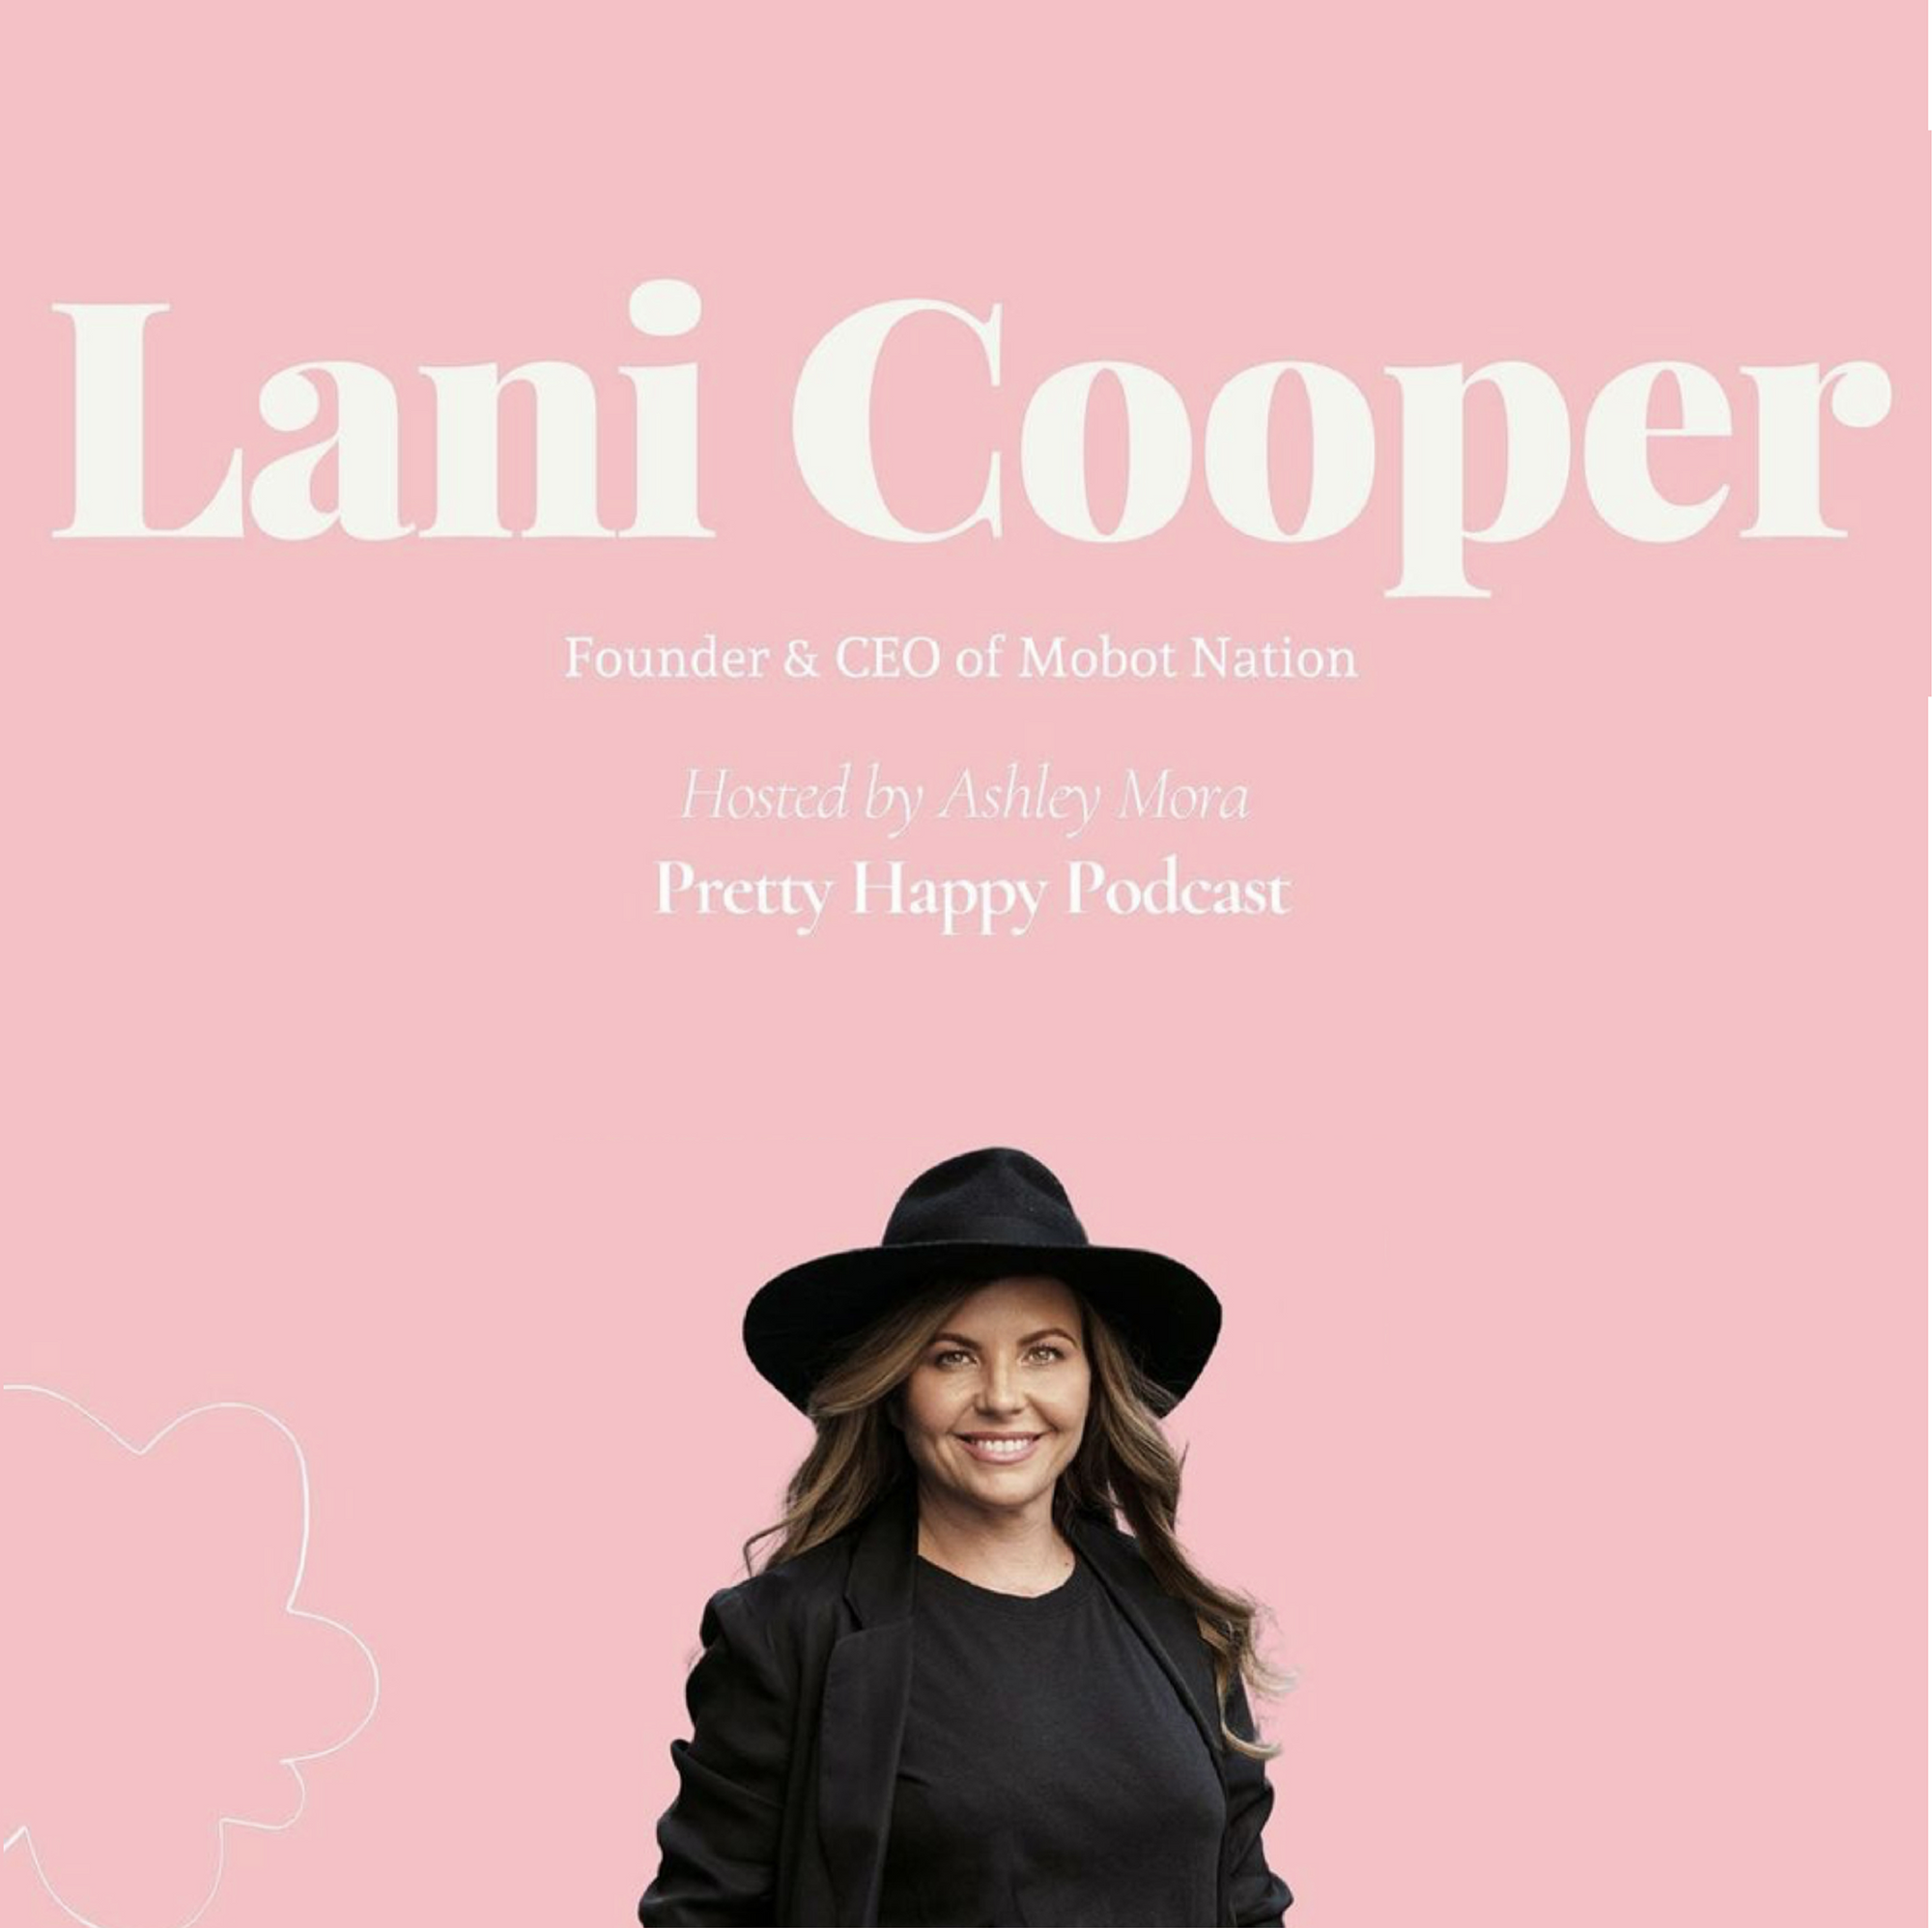 Pretty Happy Podcast with Founder & CEO of MOBOT, Lani Cooper